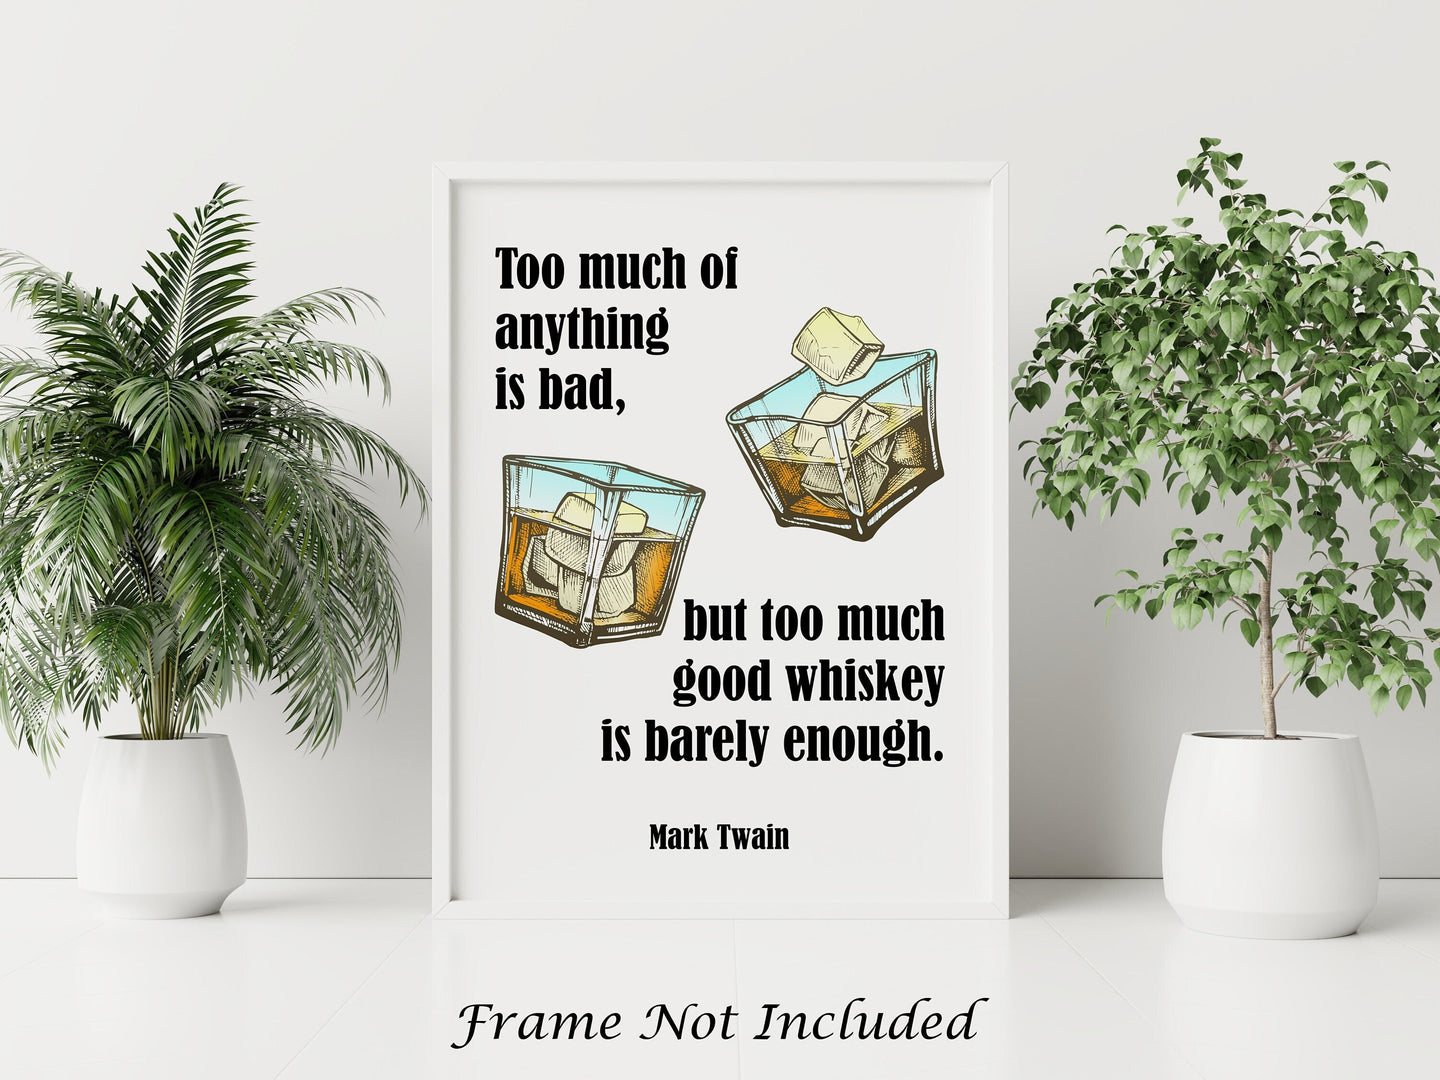 Mark Twain Whiskey Quote - Too much of anything is bad, but too much good whiskey is barely enough - Physical Print Without Frame